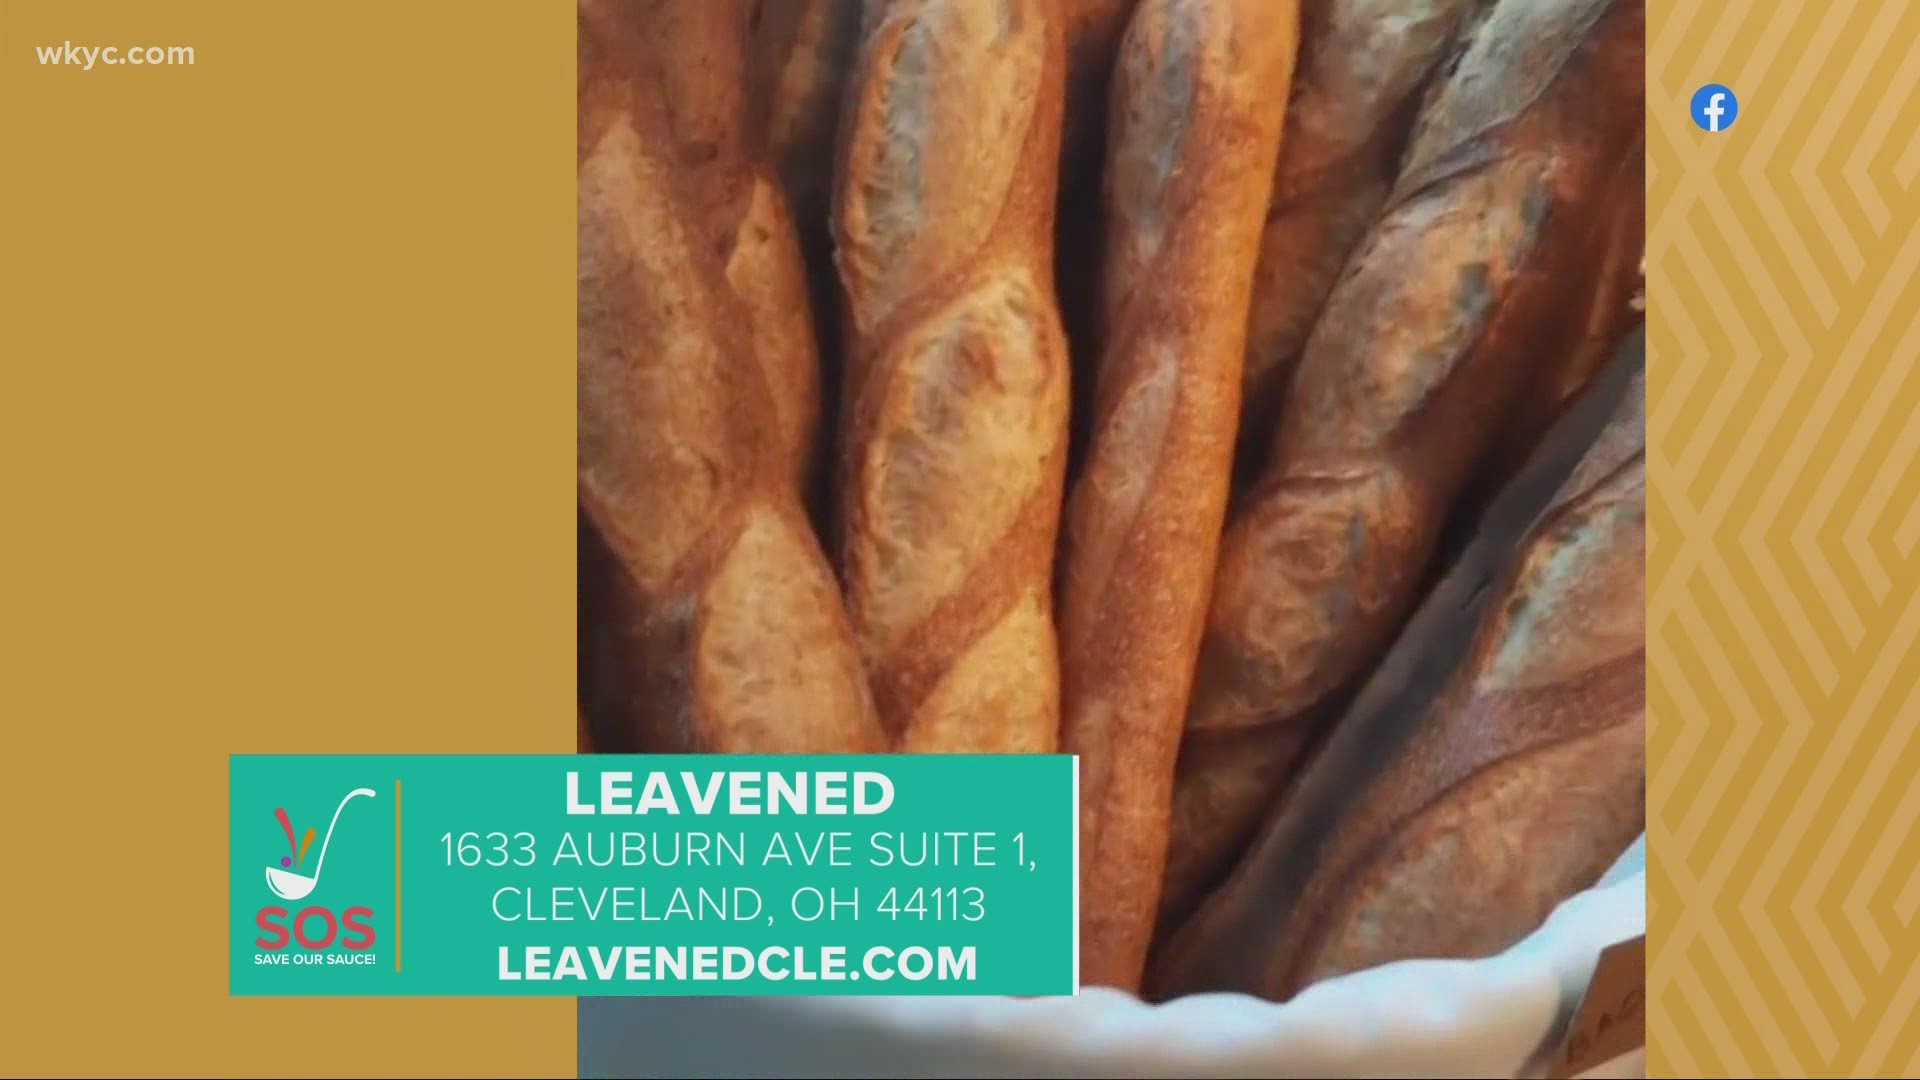 Save Our Sauce goes to Tremont! Leavened bread company has tons of treats for the whole family to enjoy.